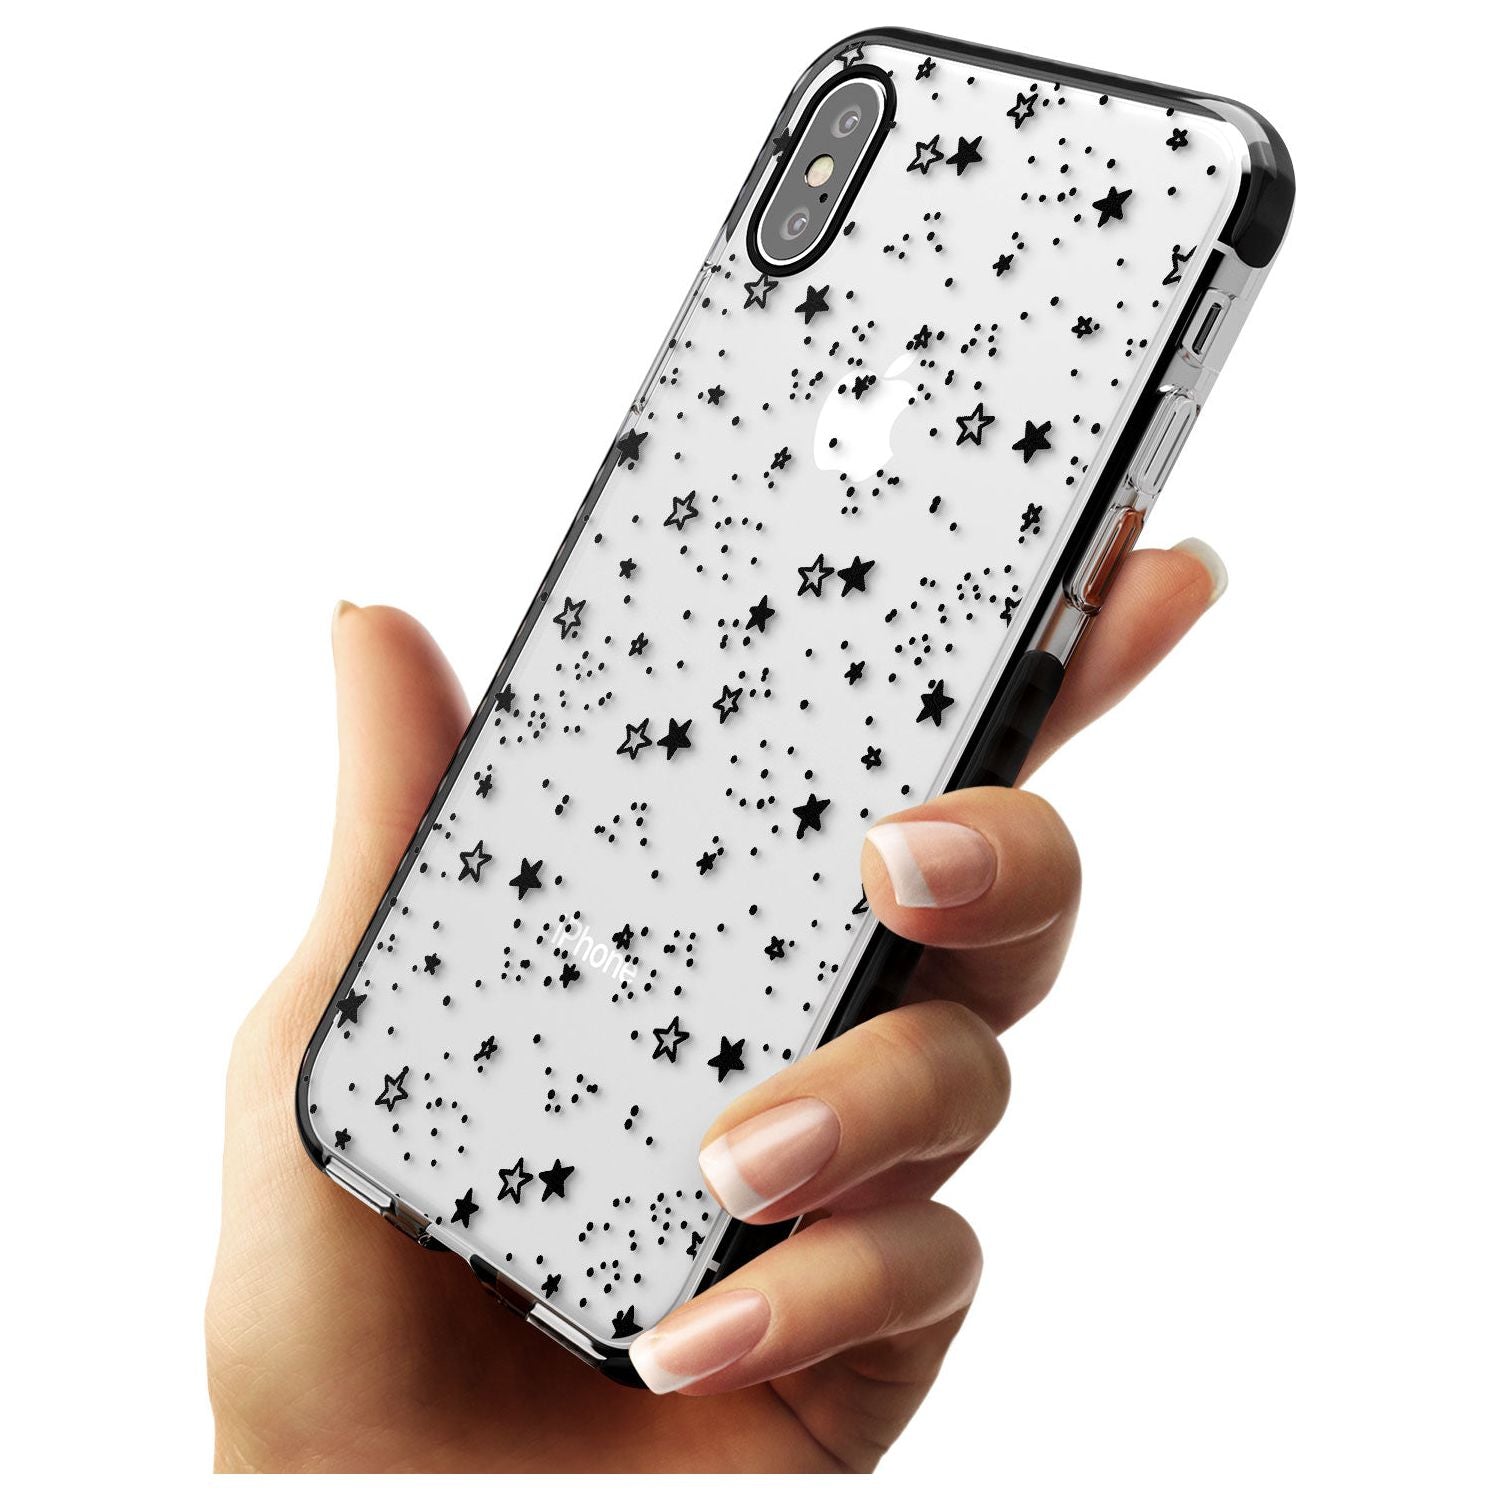 Solid Stars Black Impact Phone Case for iPhone X XS Max XR